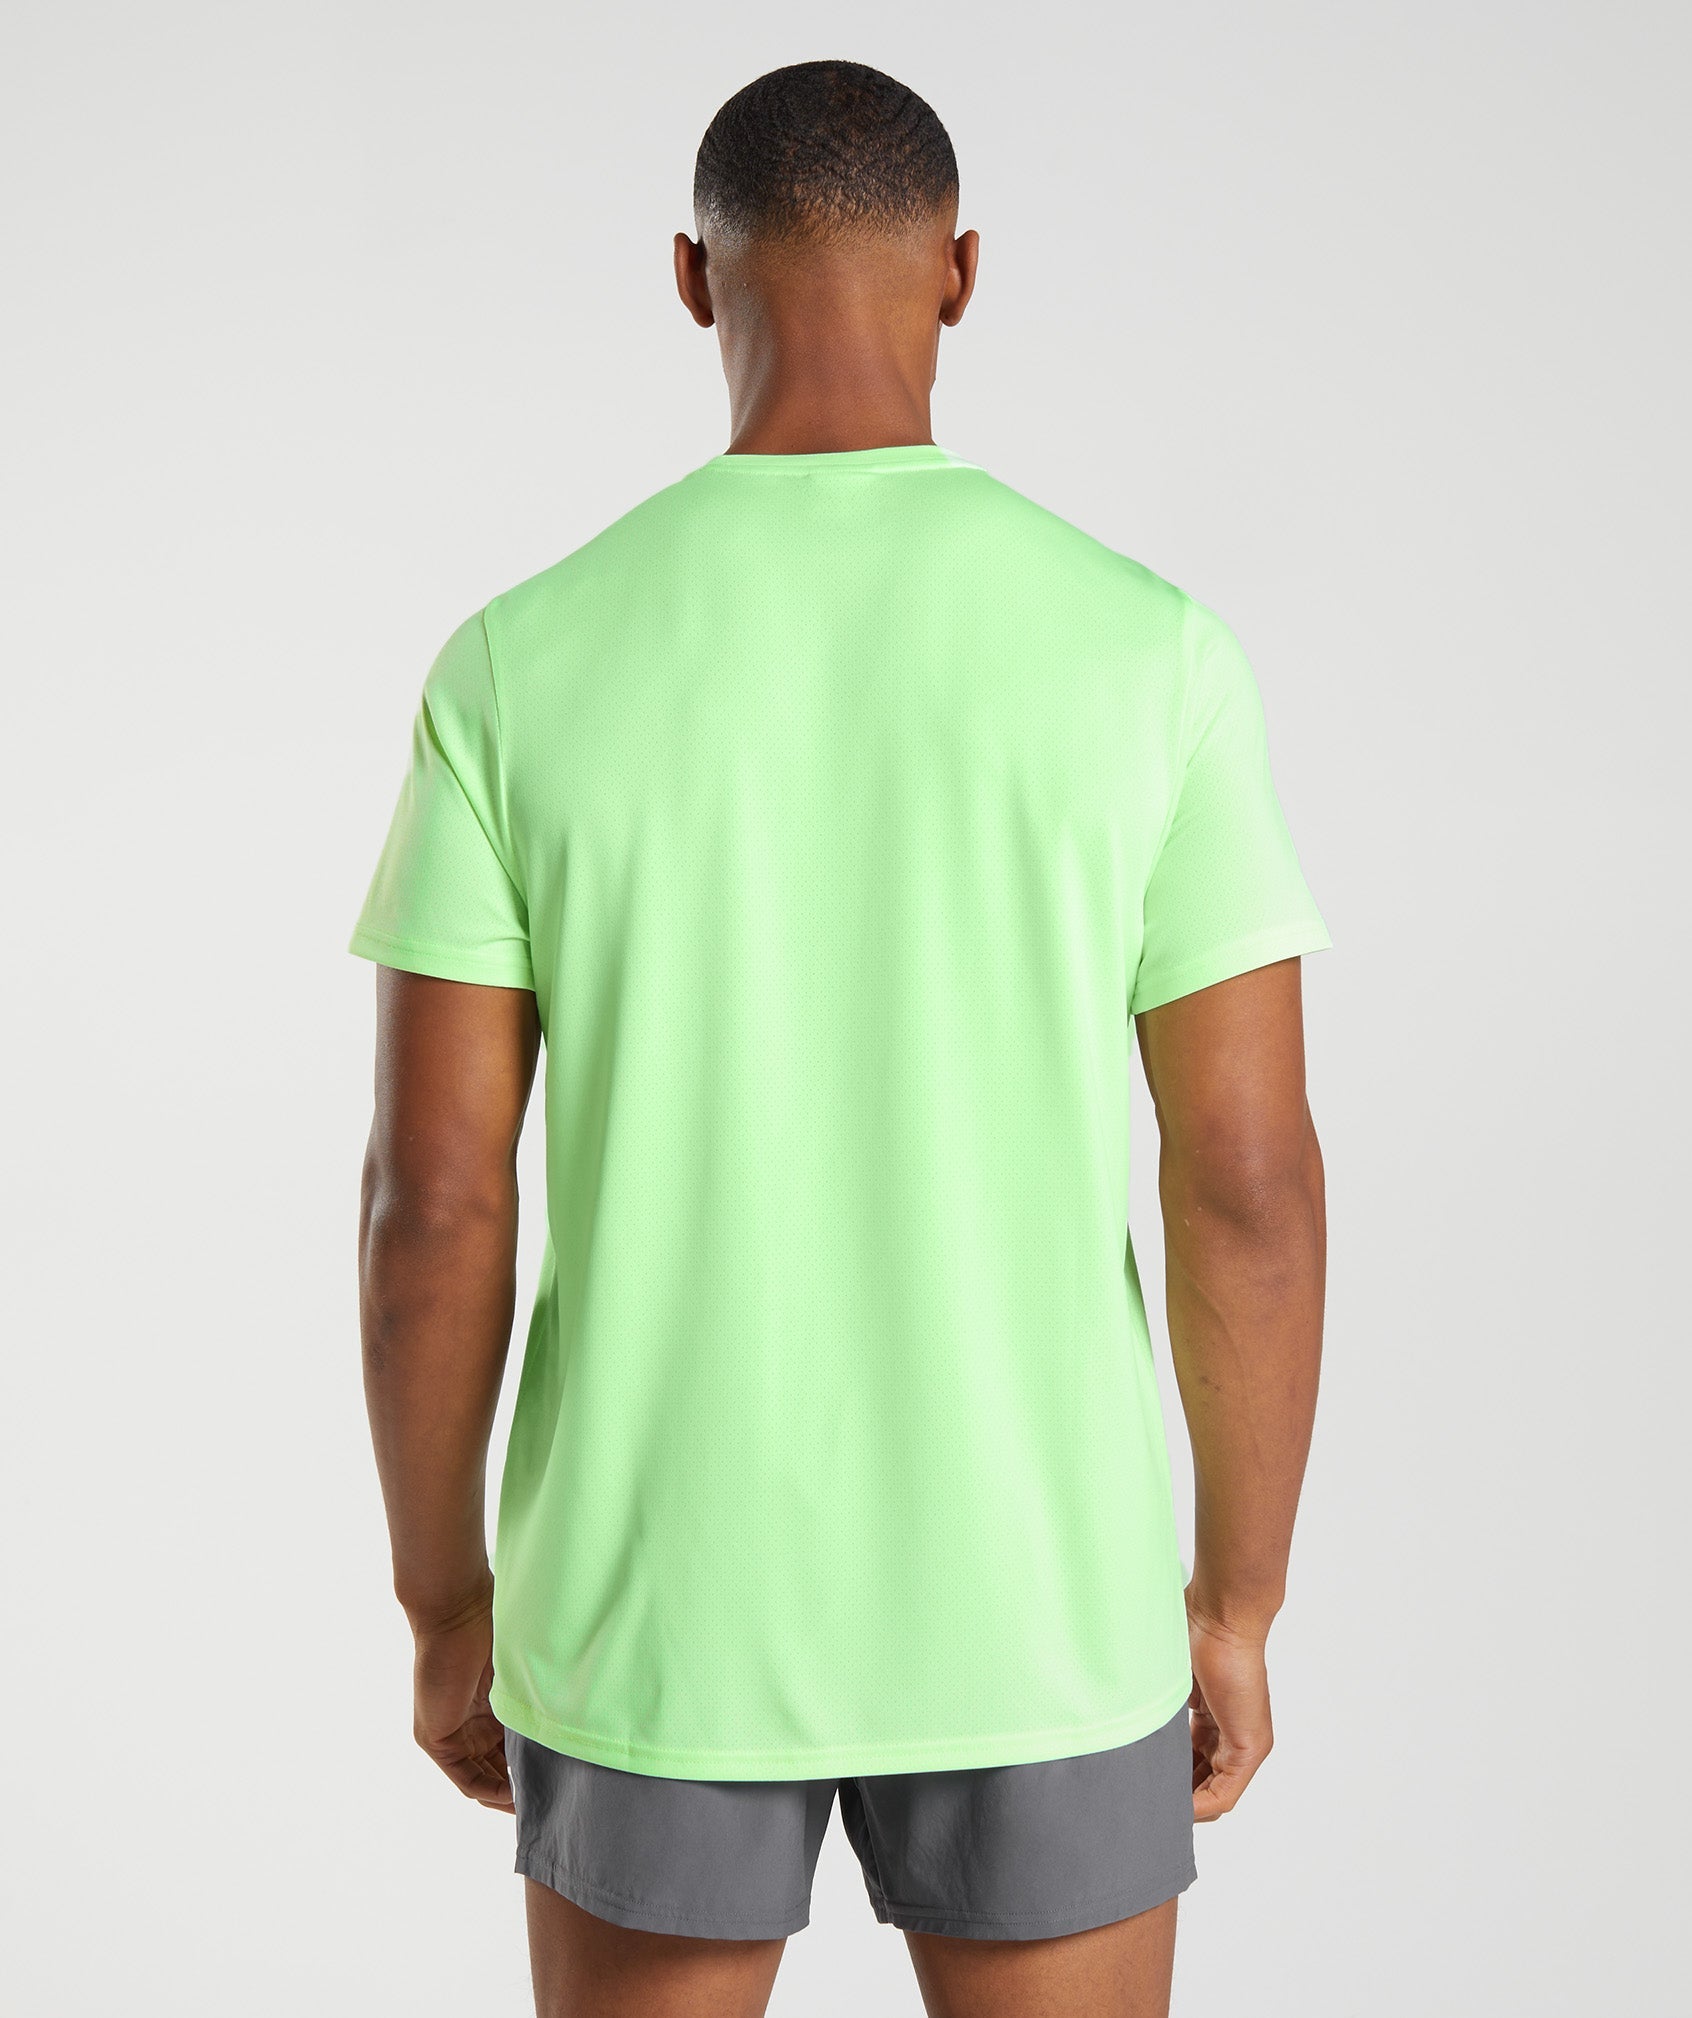 Arrival T-Shirt in Fluo Mint - view 2